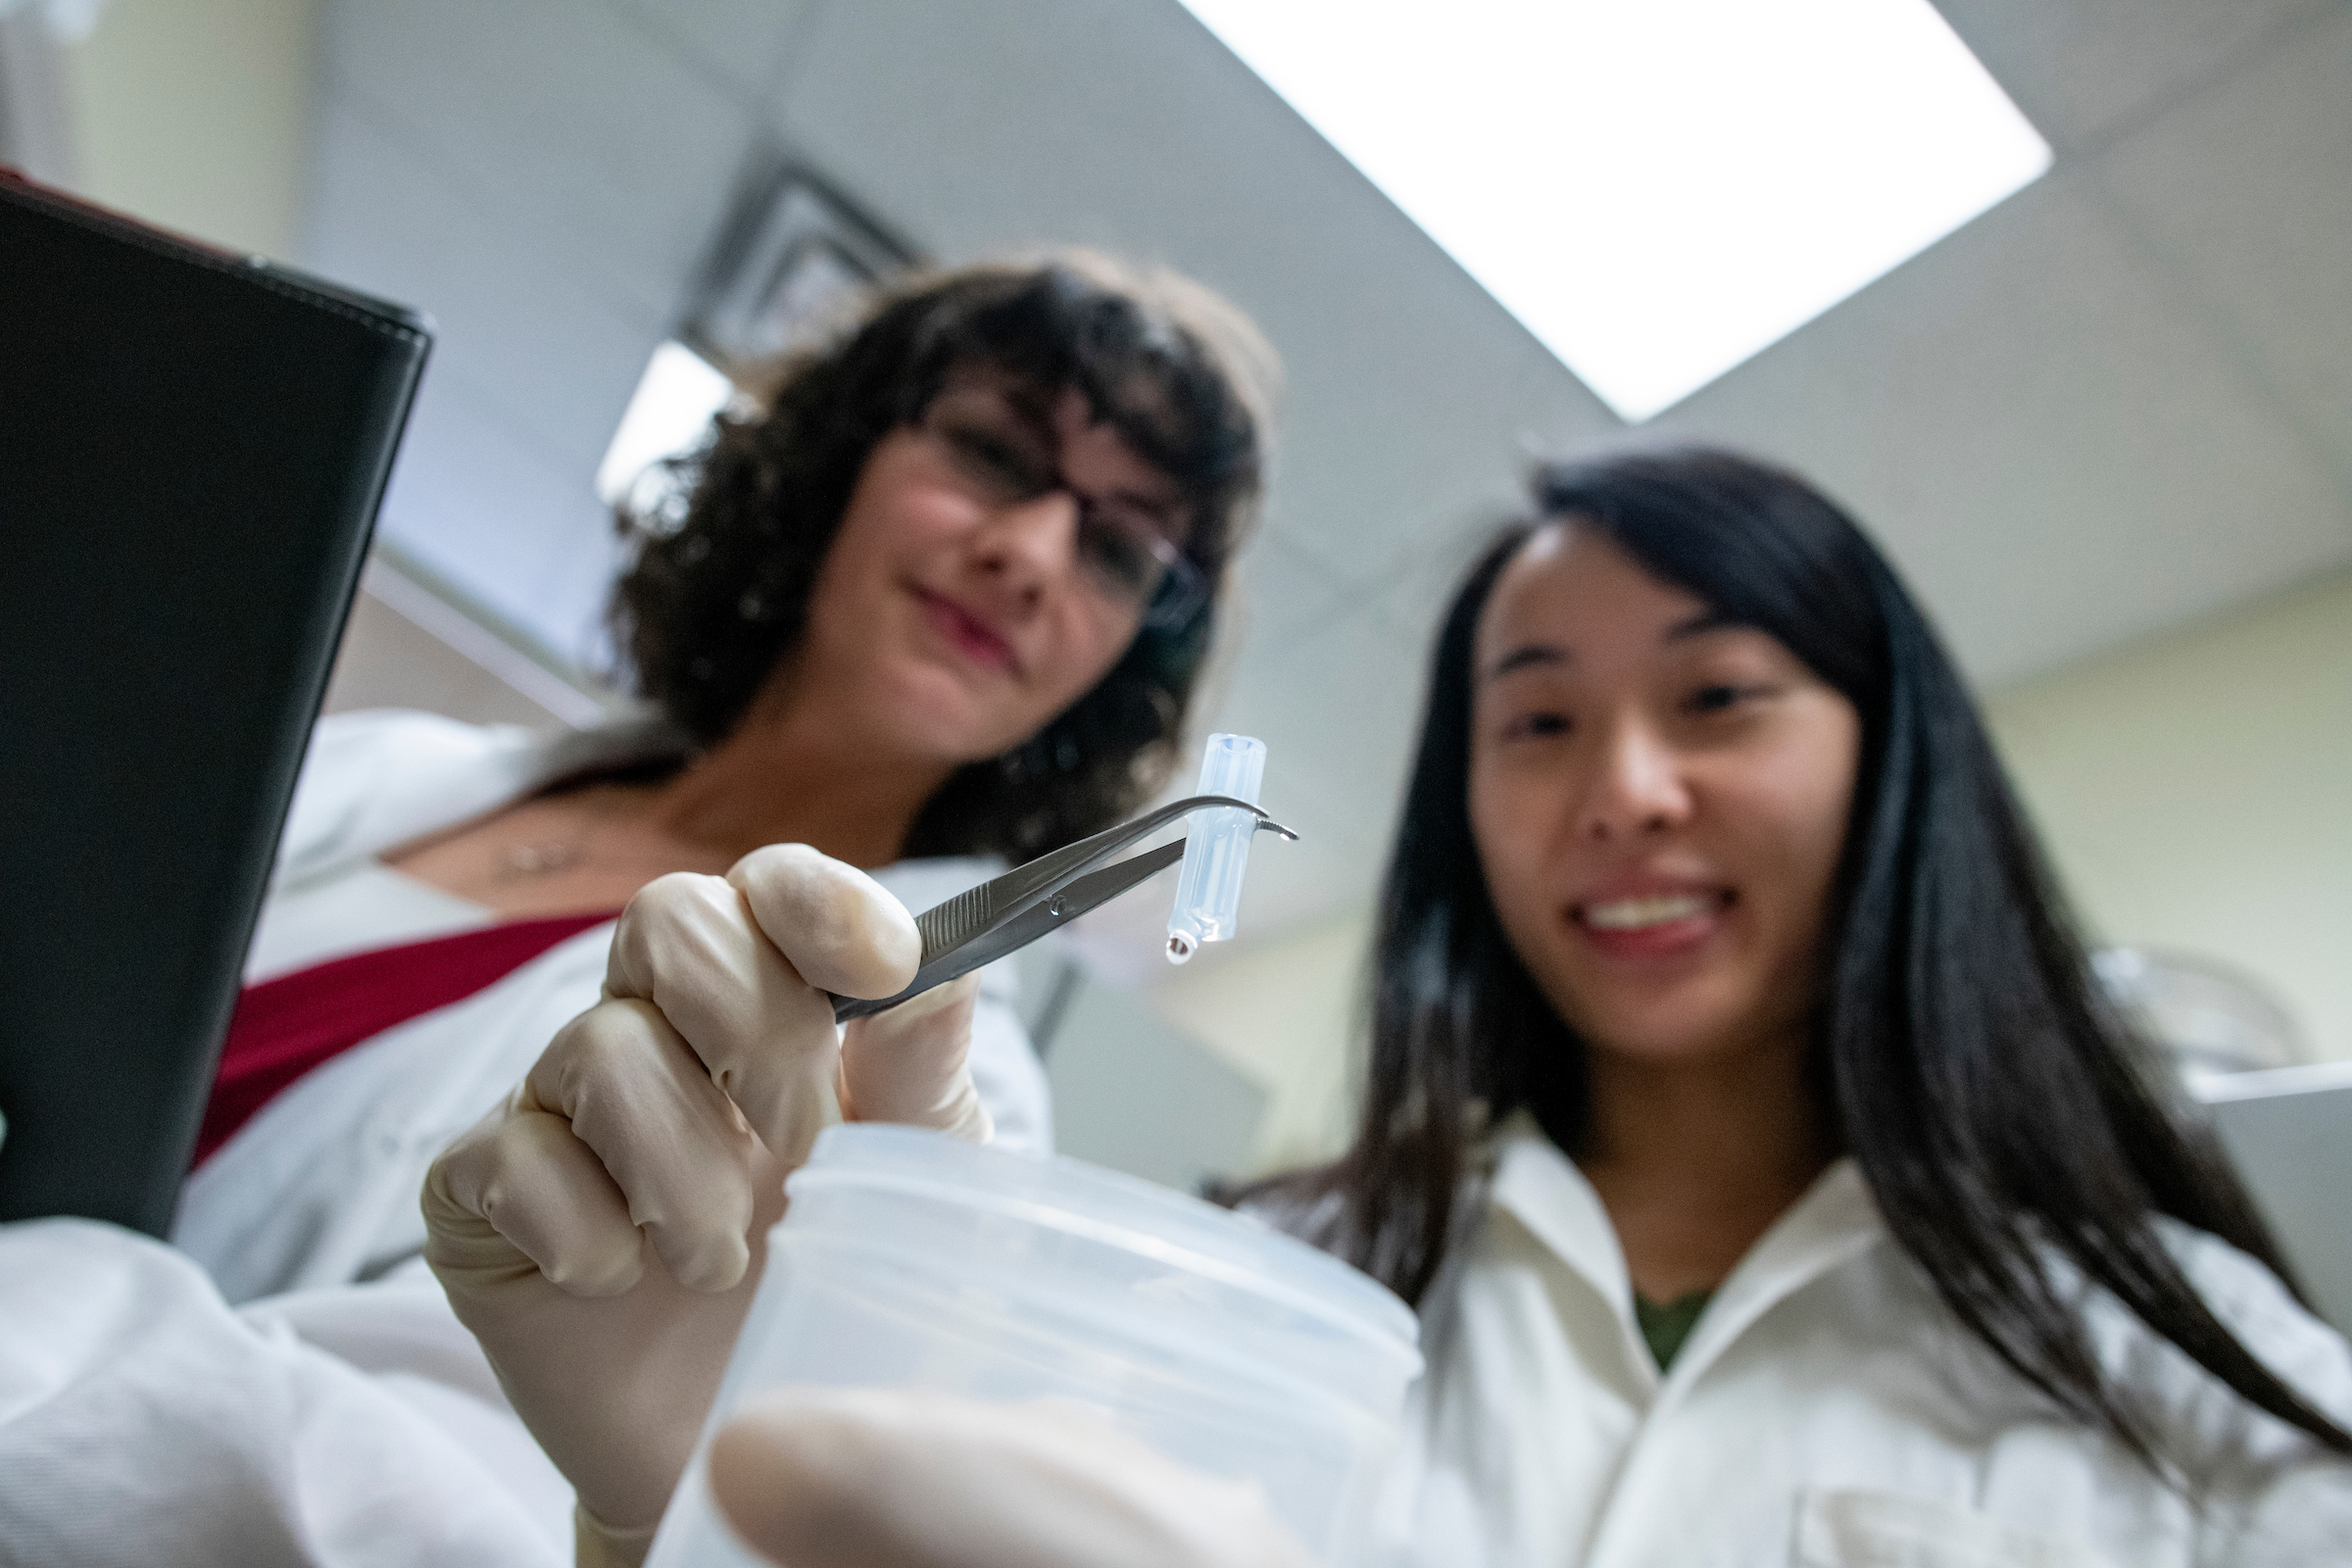 Caitlin Howell and her Graduate Research student Junie Fong, a PhD student in the Graduate School of Biomedical Science and Engineering, develop new components for medical catheters to help decrease the chance of infection with a new coating.